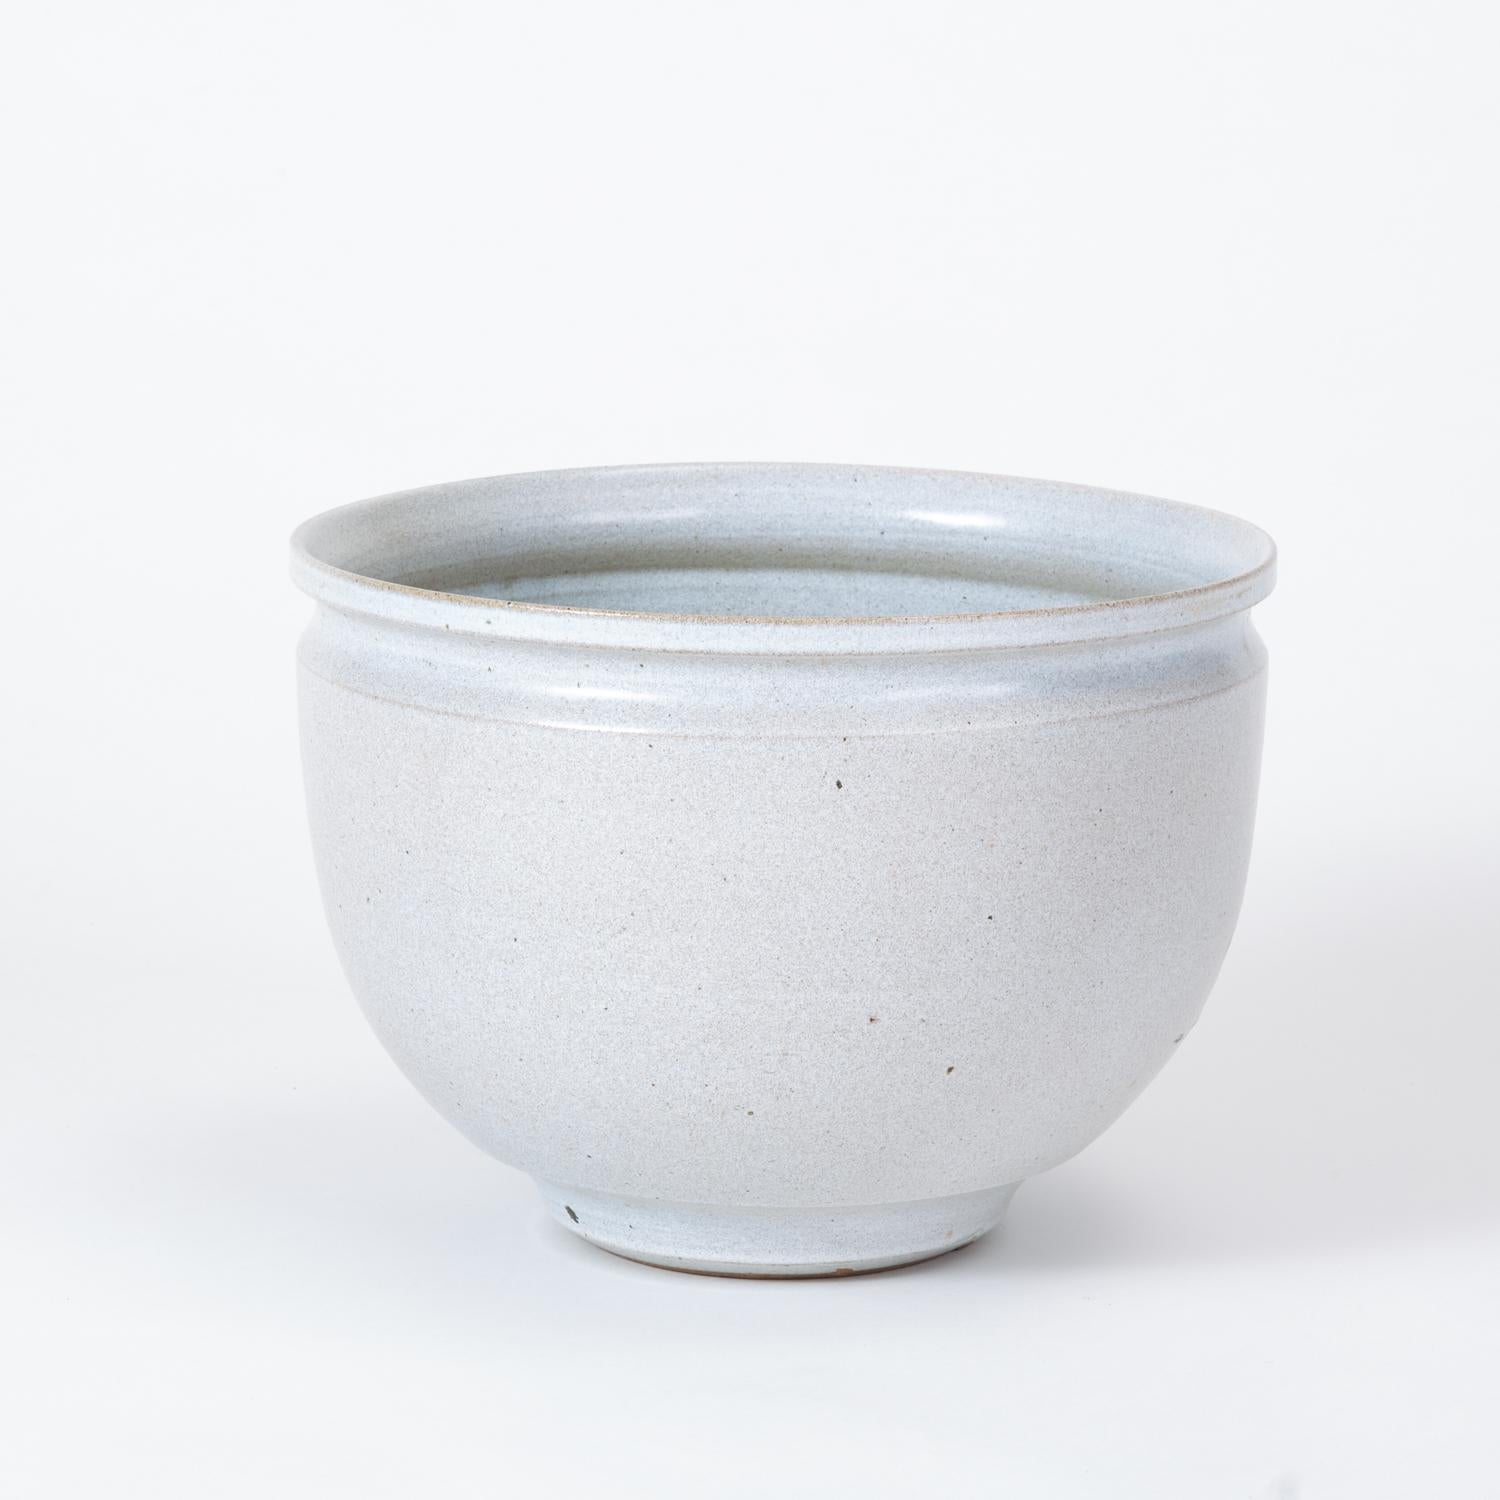 Late 20th Century Single Unscored Earthgender Bowl Planter by David Cressey & Robert Maxwell